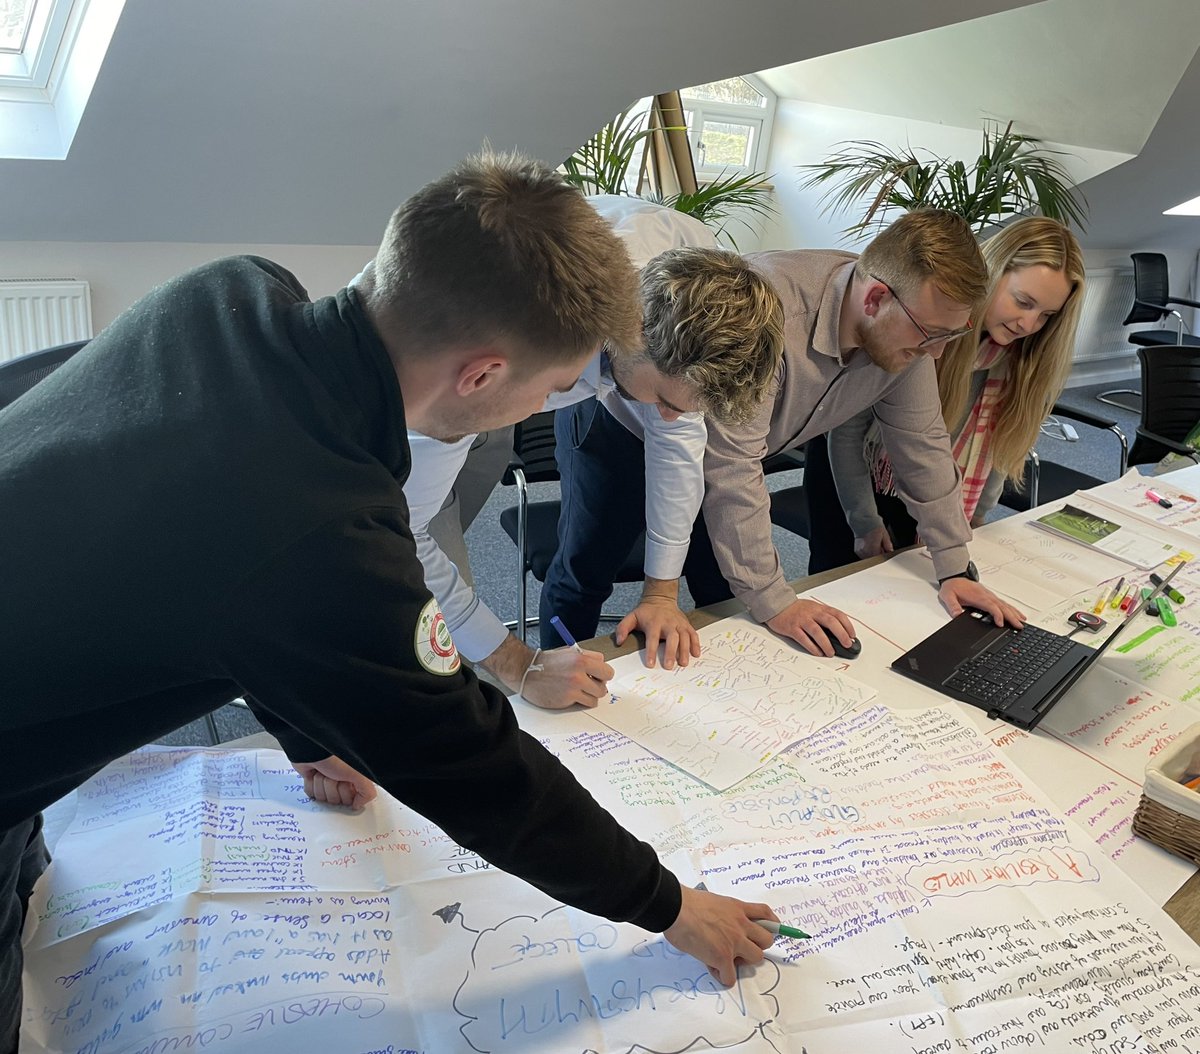 We had a successful workshop today, developing case studies of real Welsh projects for the #WJEC GCSE Built Environment #Qualification. We hope these real-life, local and exciting projects will #InspireStudents to engage in their studies, and go on to build the #FutureOfWales.